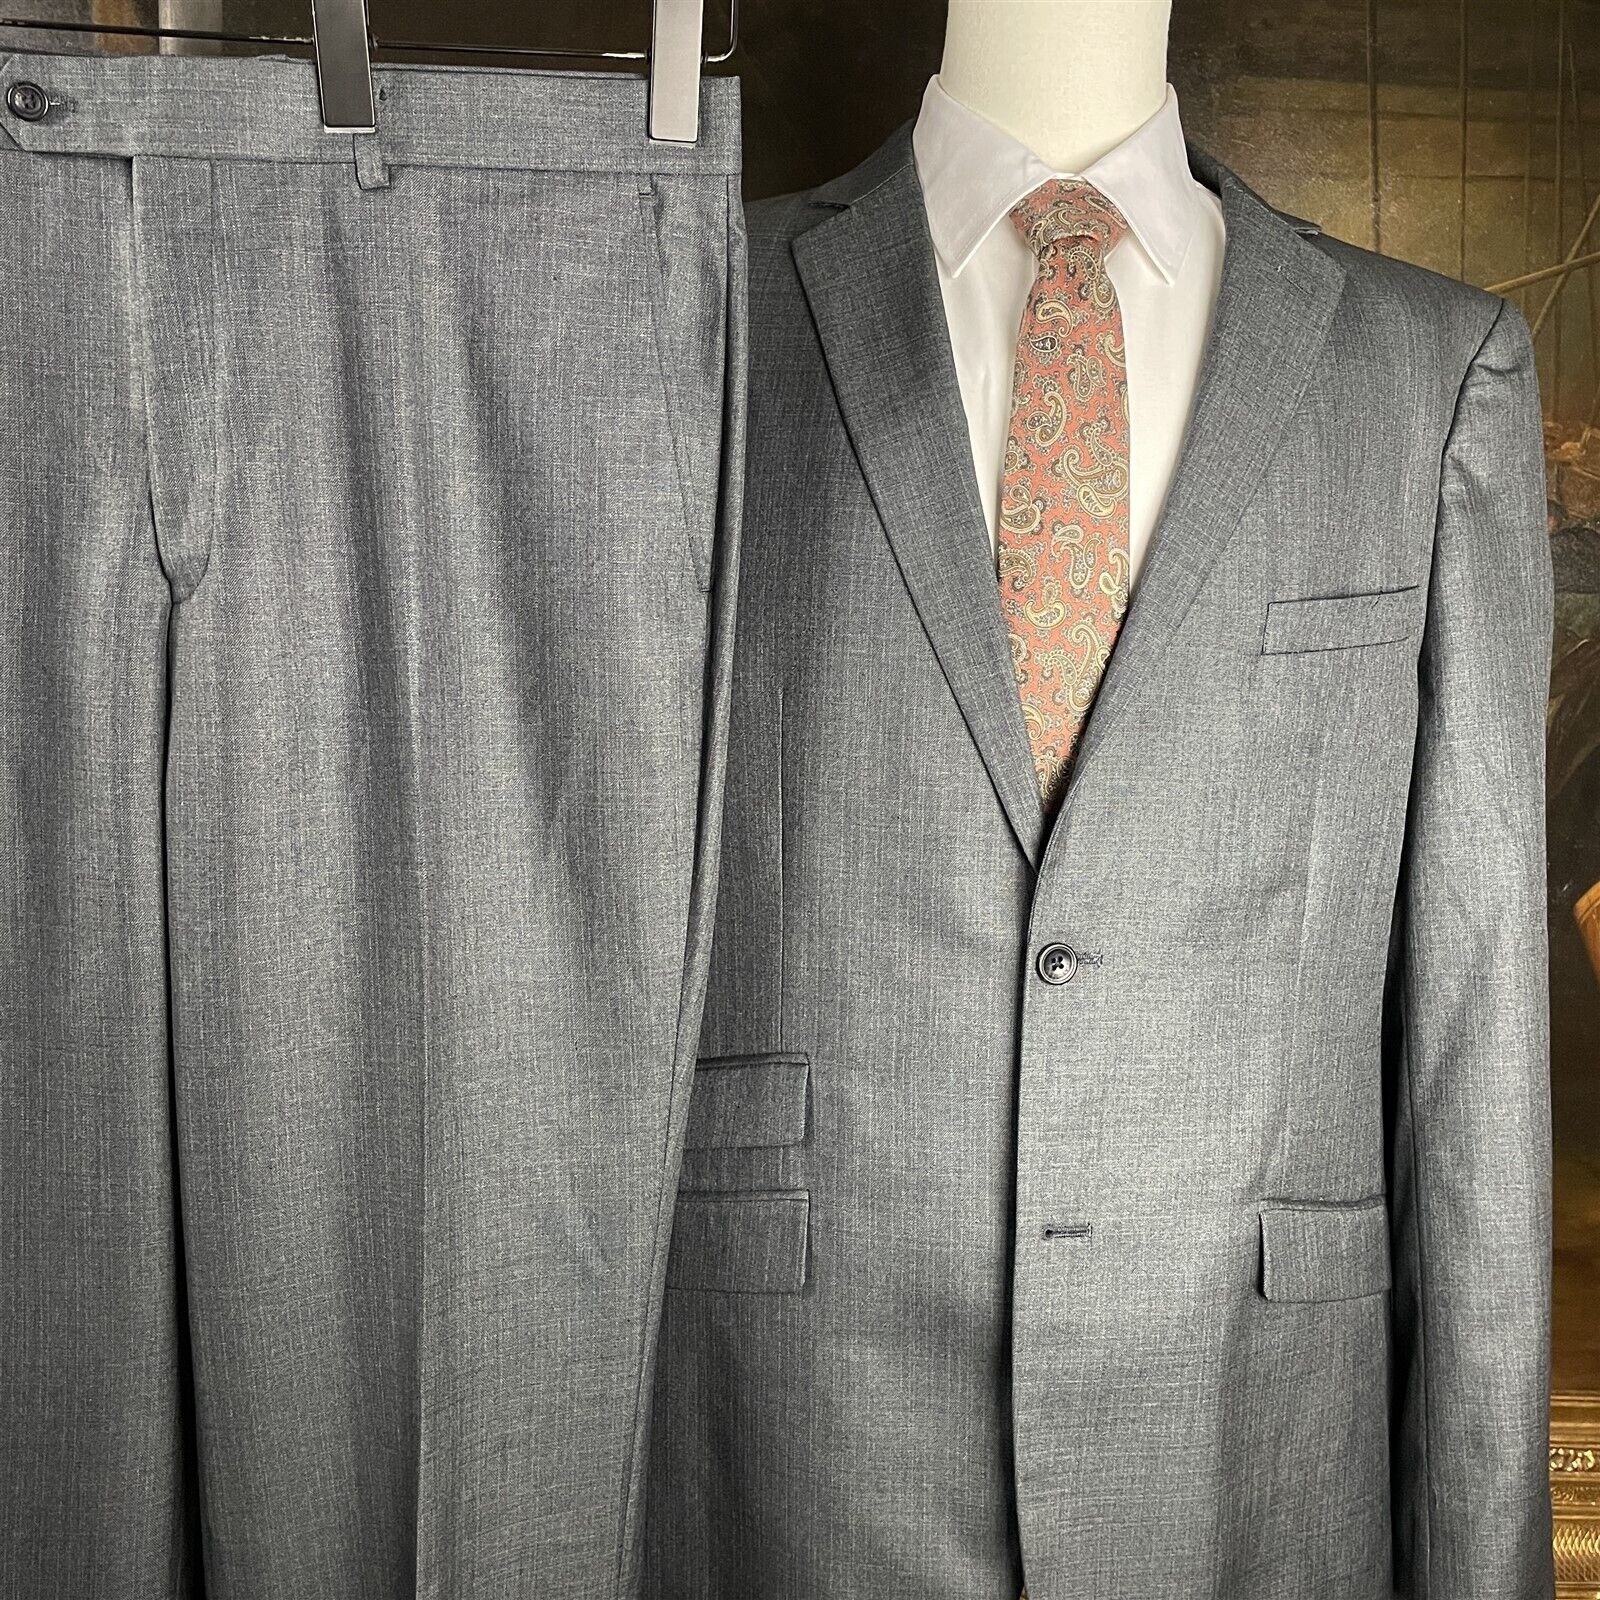 Marc Ecko "Well Hung" 44L 38 x 32 2 Piece Gray 2 Button Suit Flat Front Pants